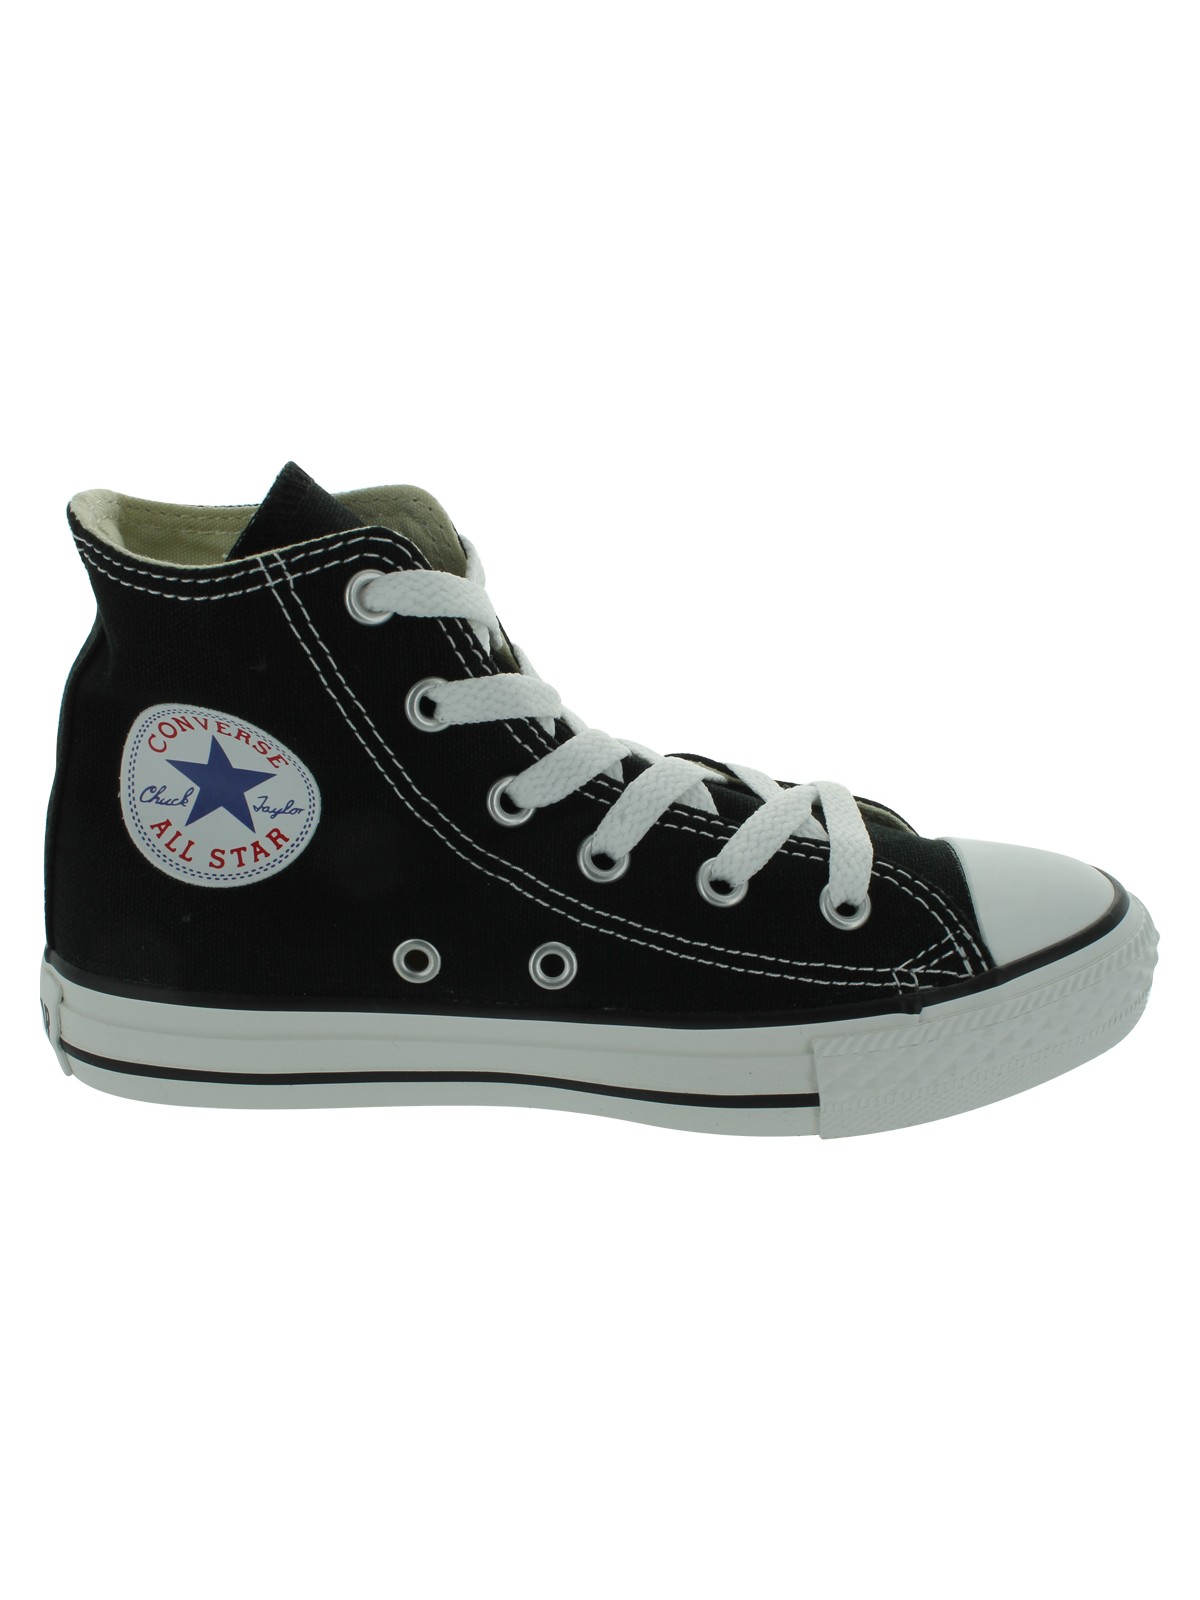 Converse Kid's Chuck Taylor All Star High Top Shoe - image 2 of 5